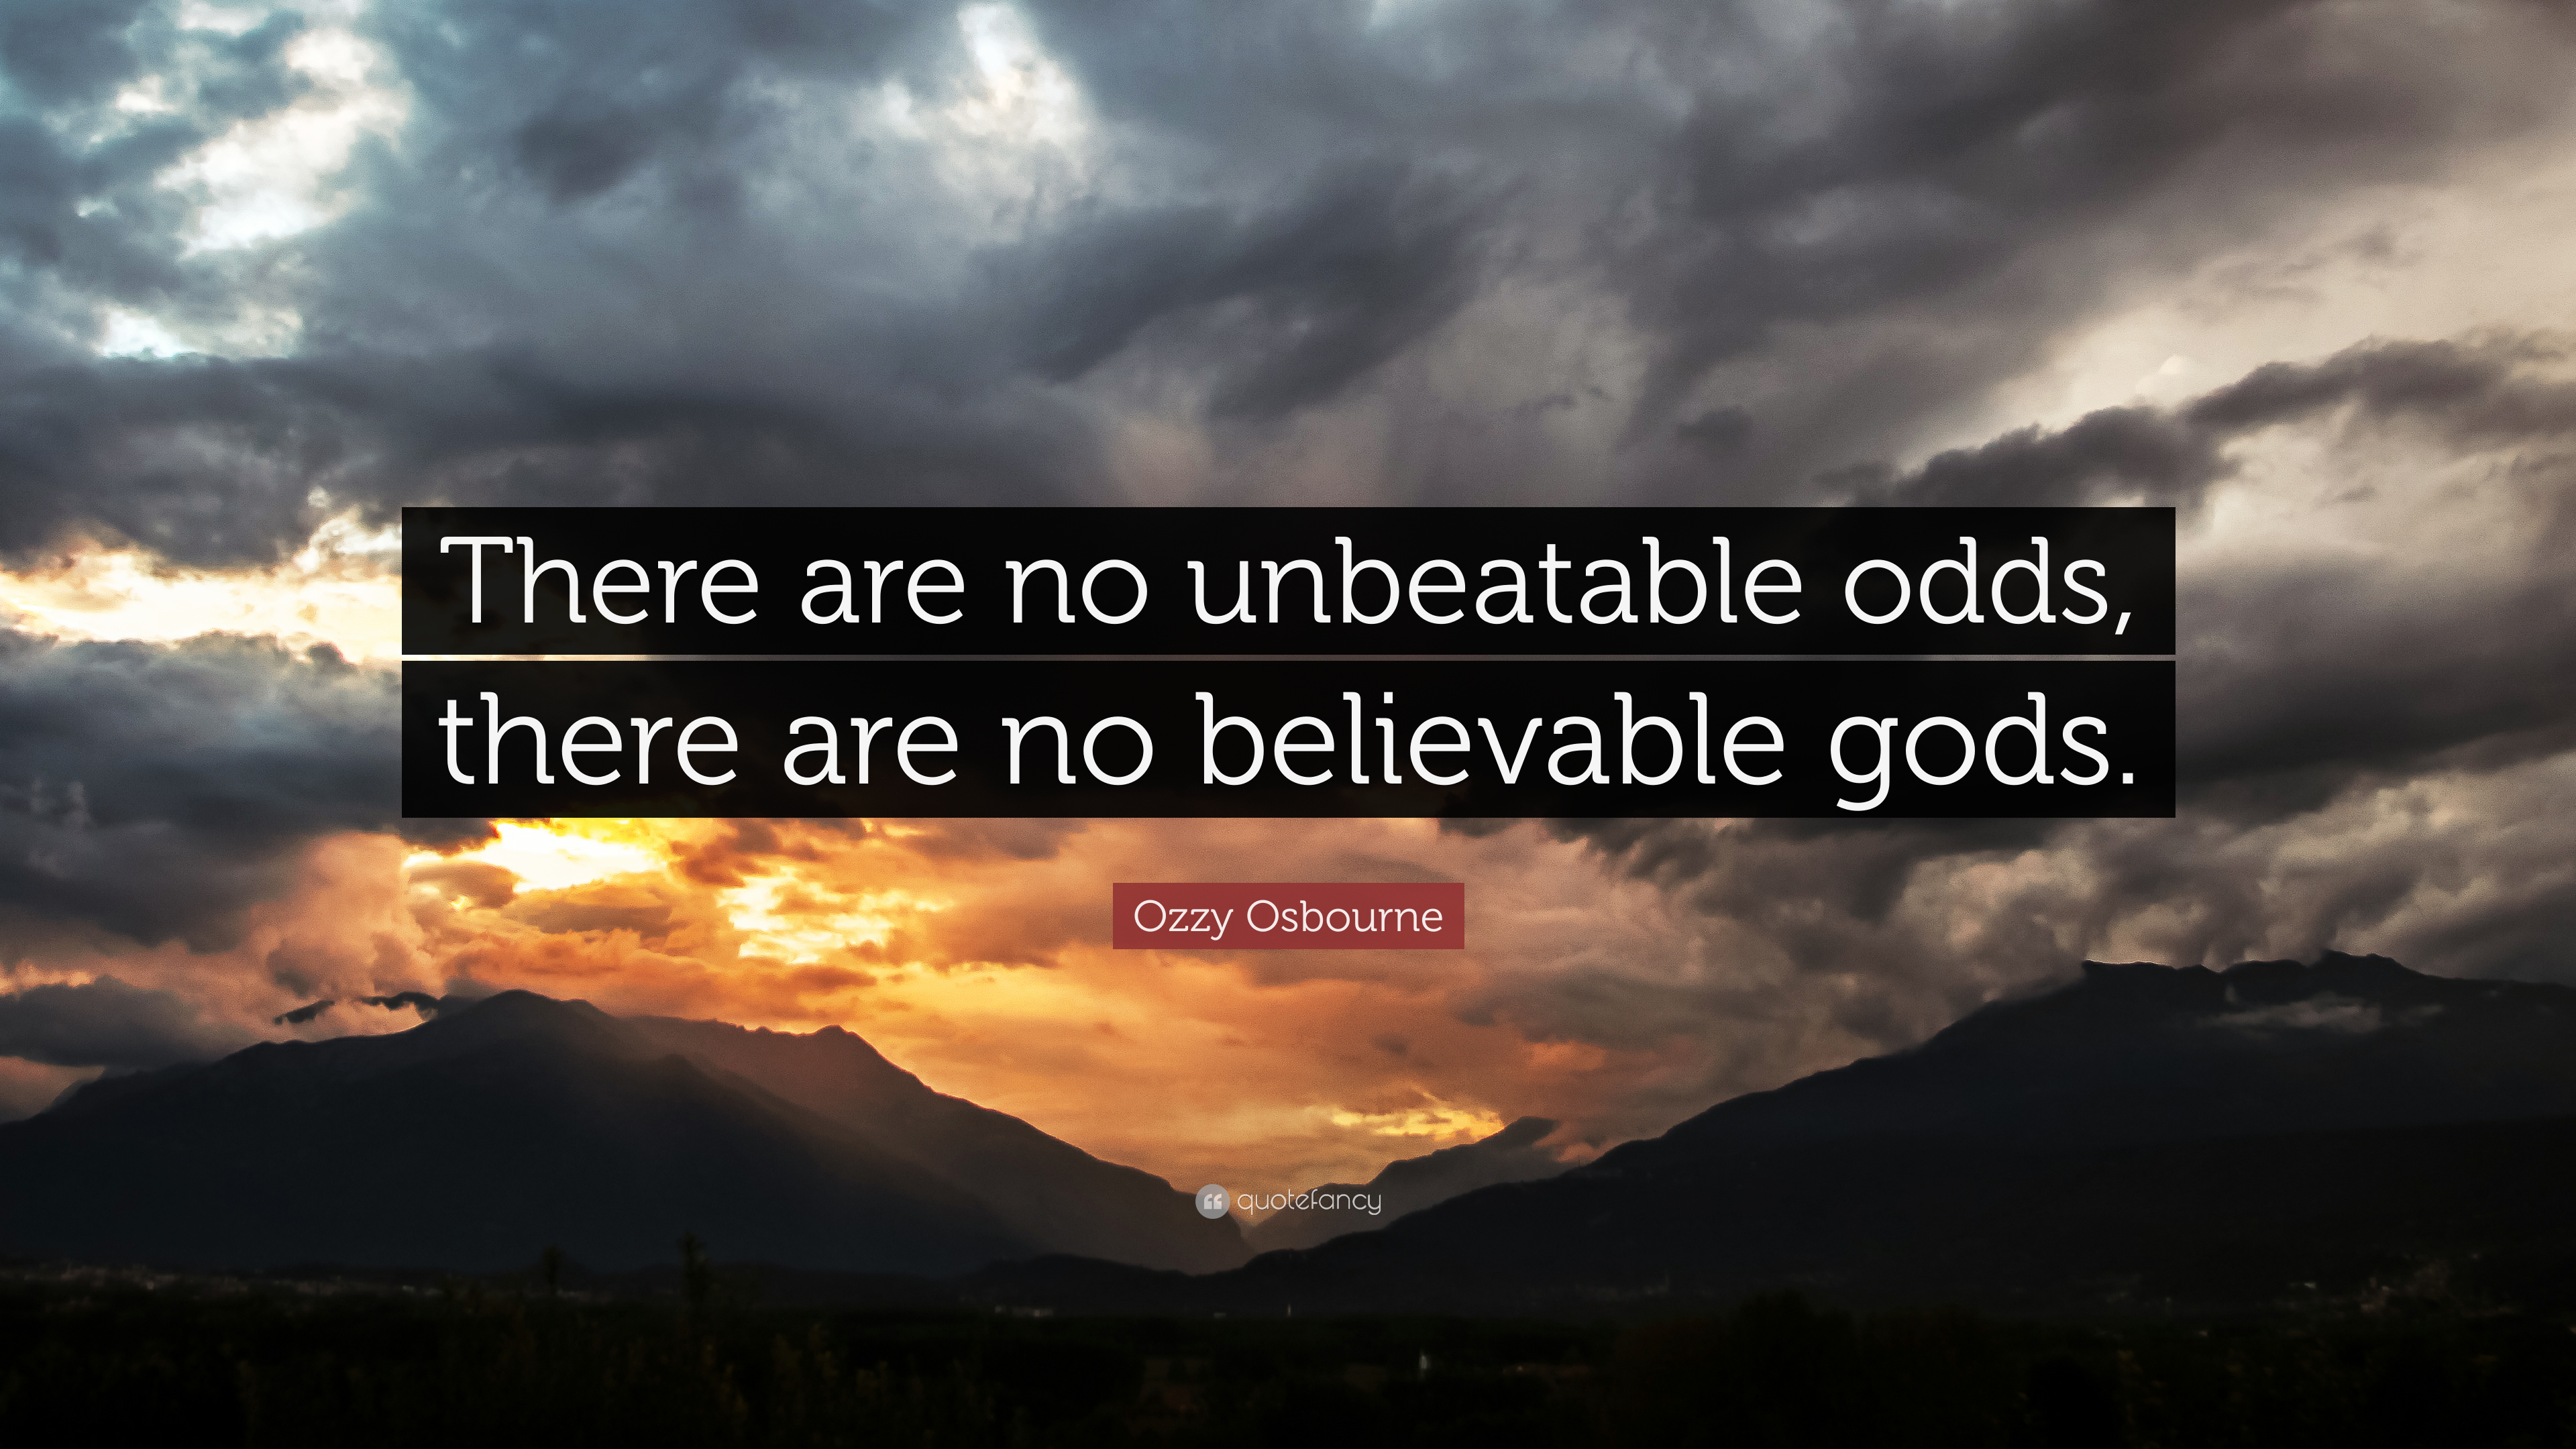 General 3840x2160 nature landscape sunset clouds quote Ozzy Osbourne hills quotefancy music lyrics text God religious mountains